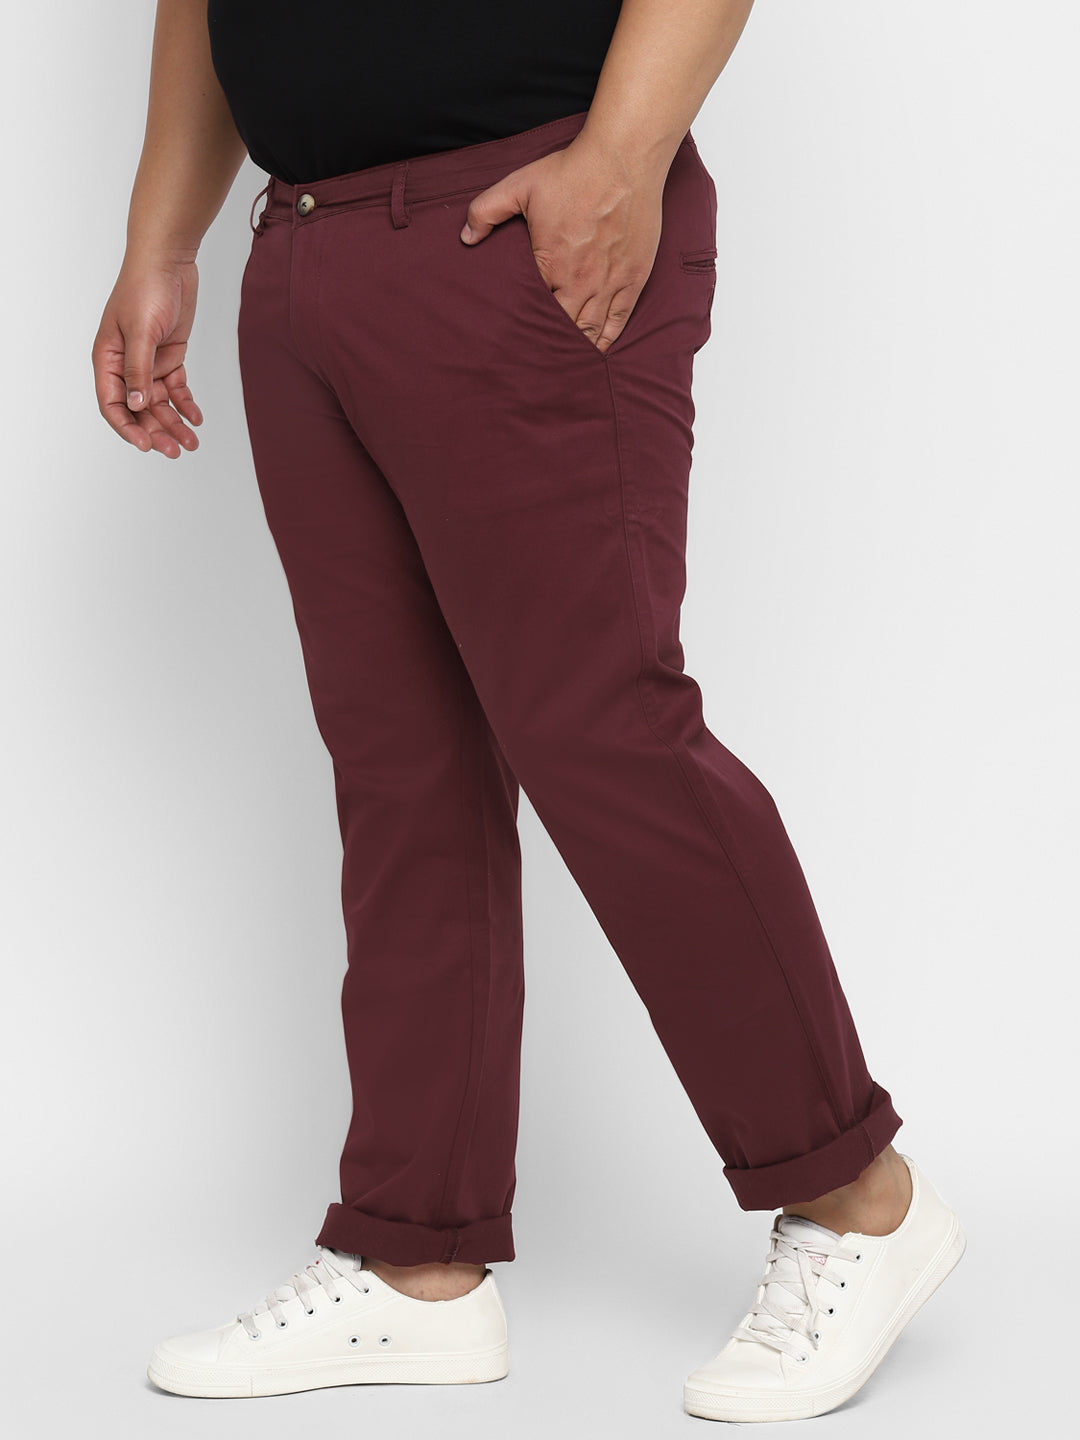 Plus Men's Wine Cotton Regular Fit Casual Chinos Trousers Stretch